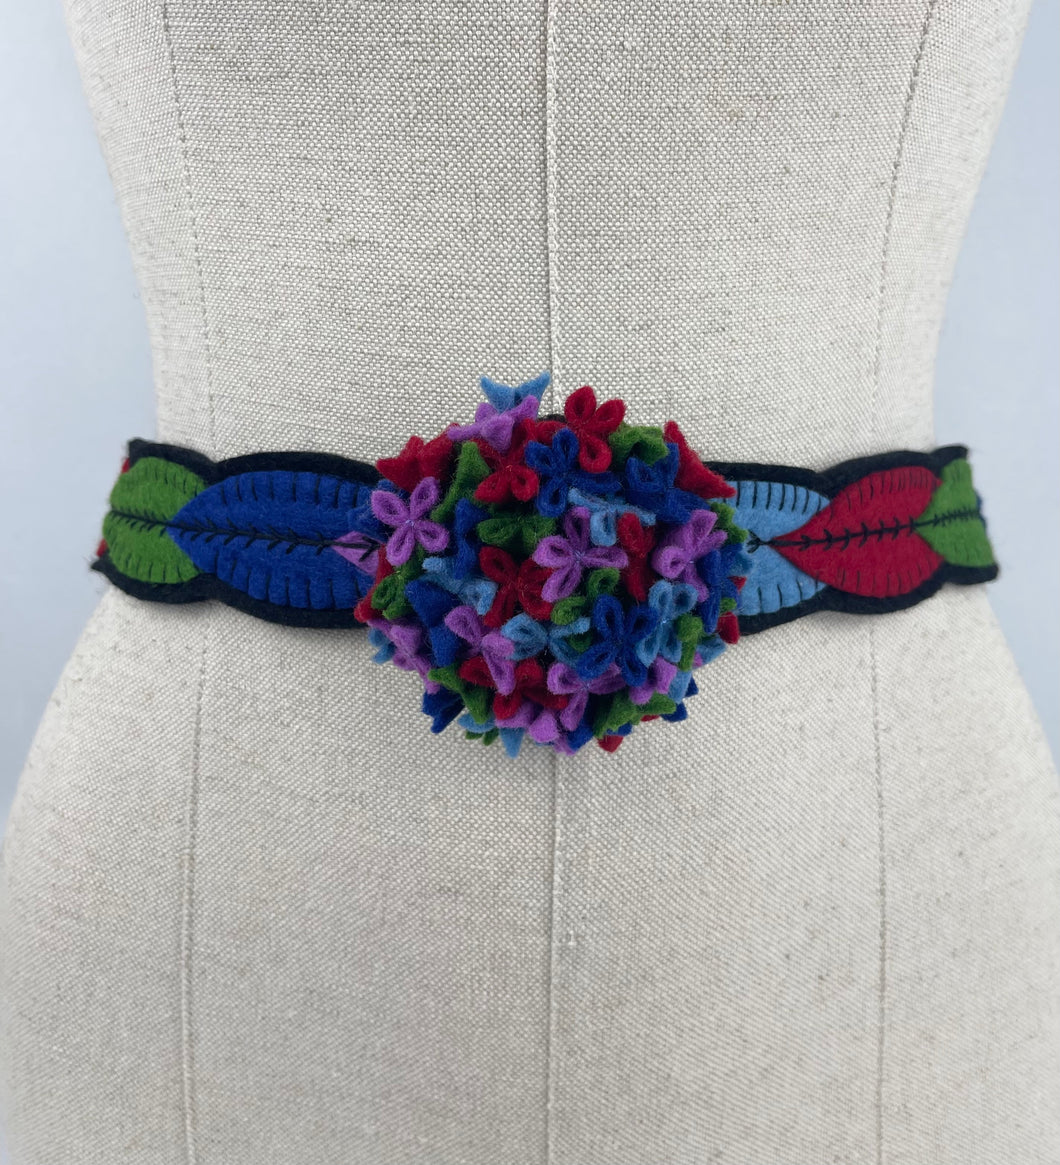 1940's Style Felt Belt in Red, Pink, Blue and Green Made From a 1941 Pattern Using Pure Wool Felt - 28.5